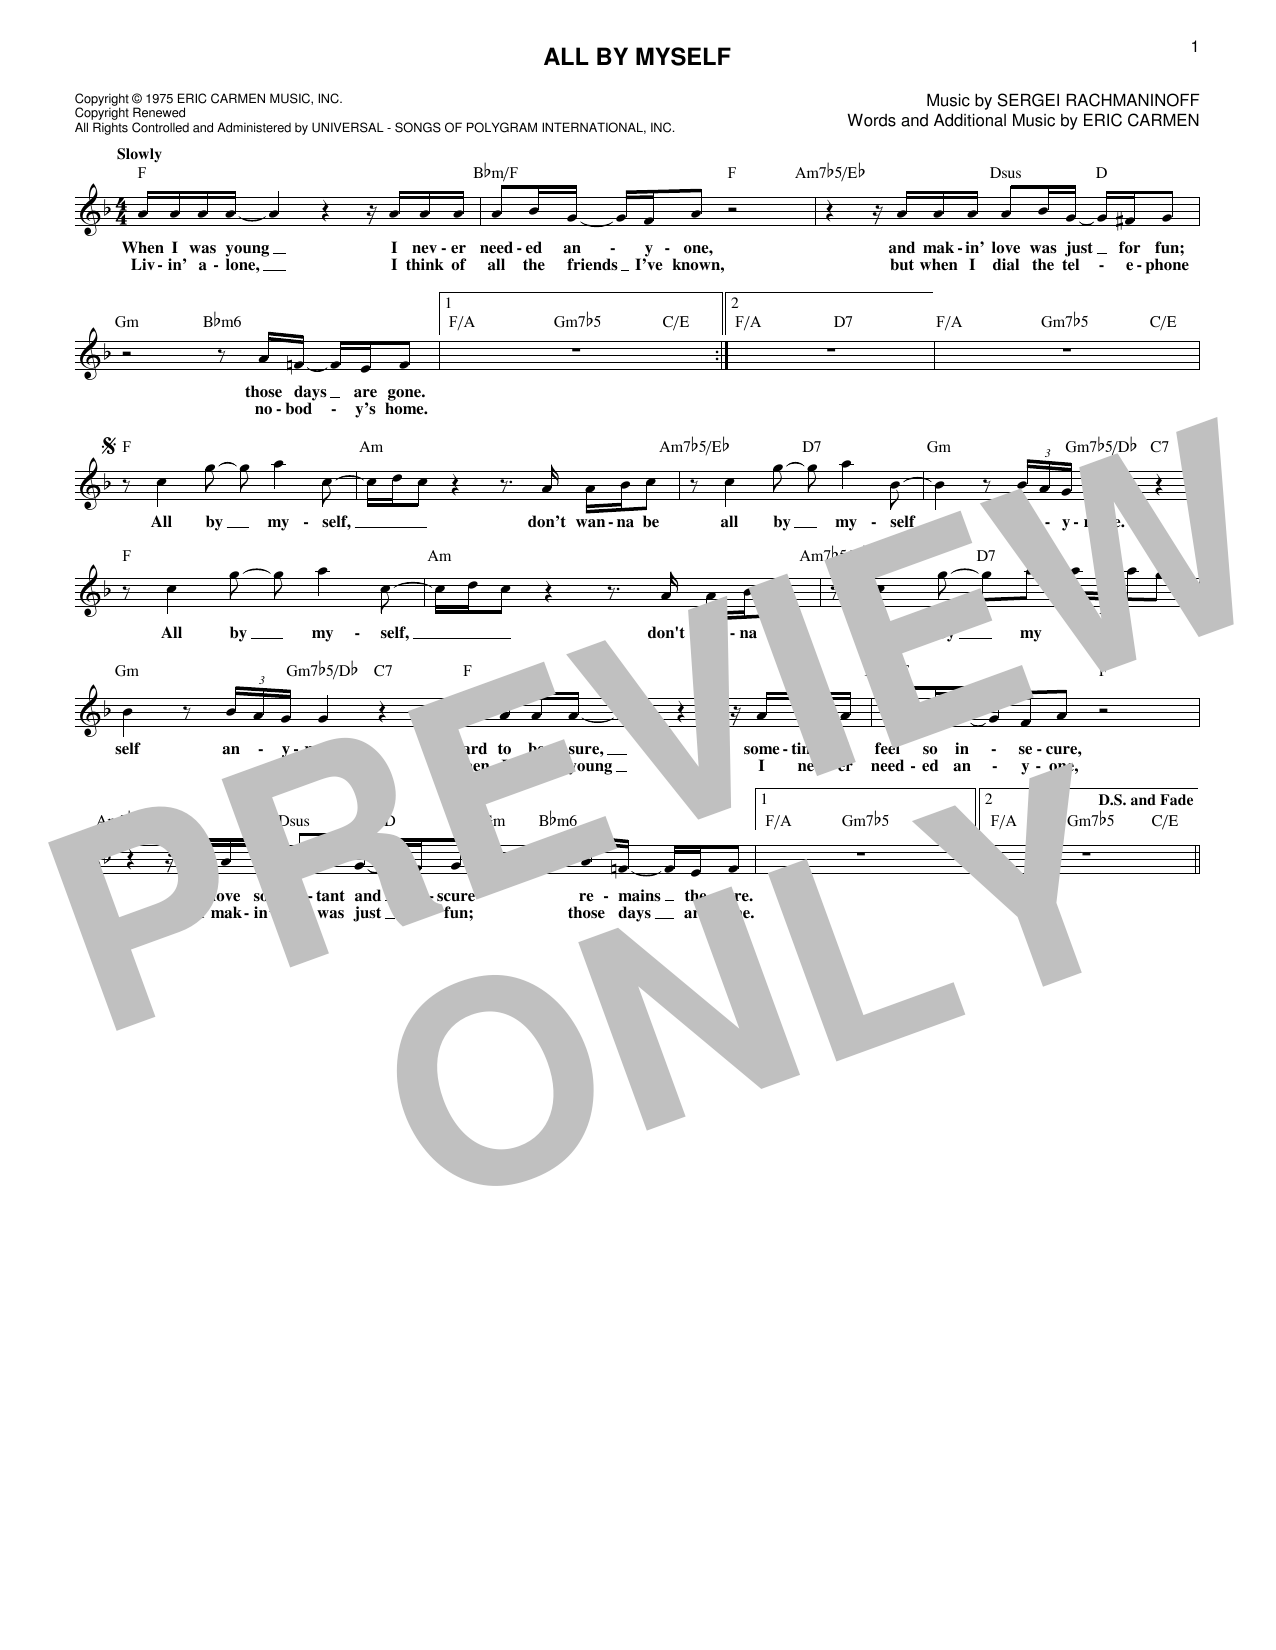 Download Eric Carmen All By Myself Sheet Music